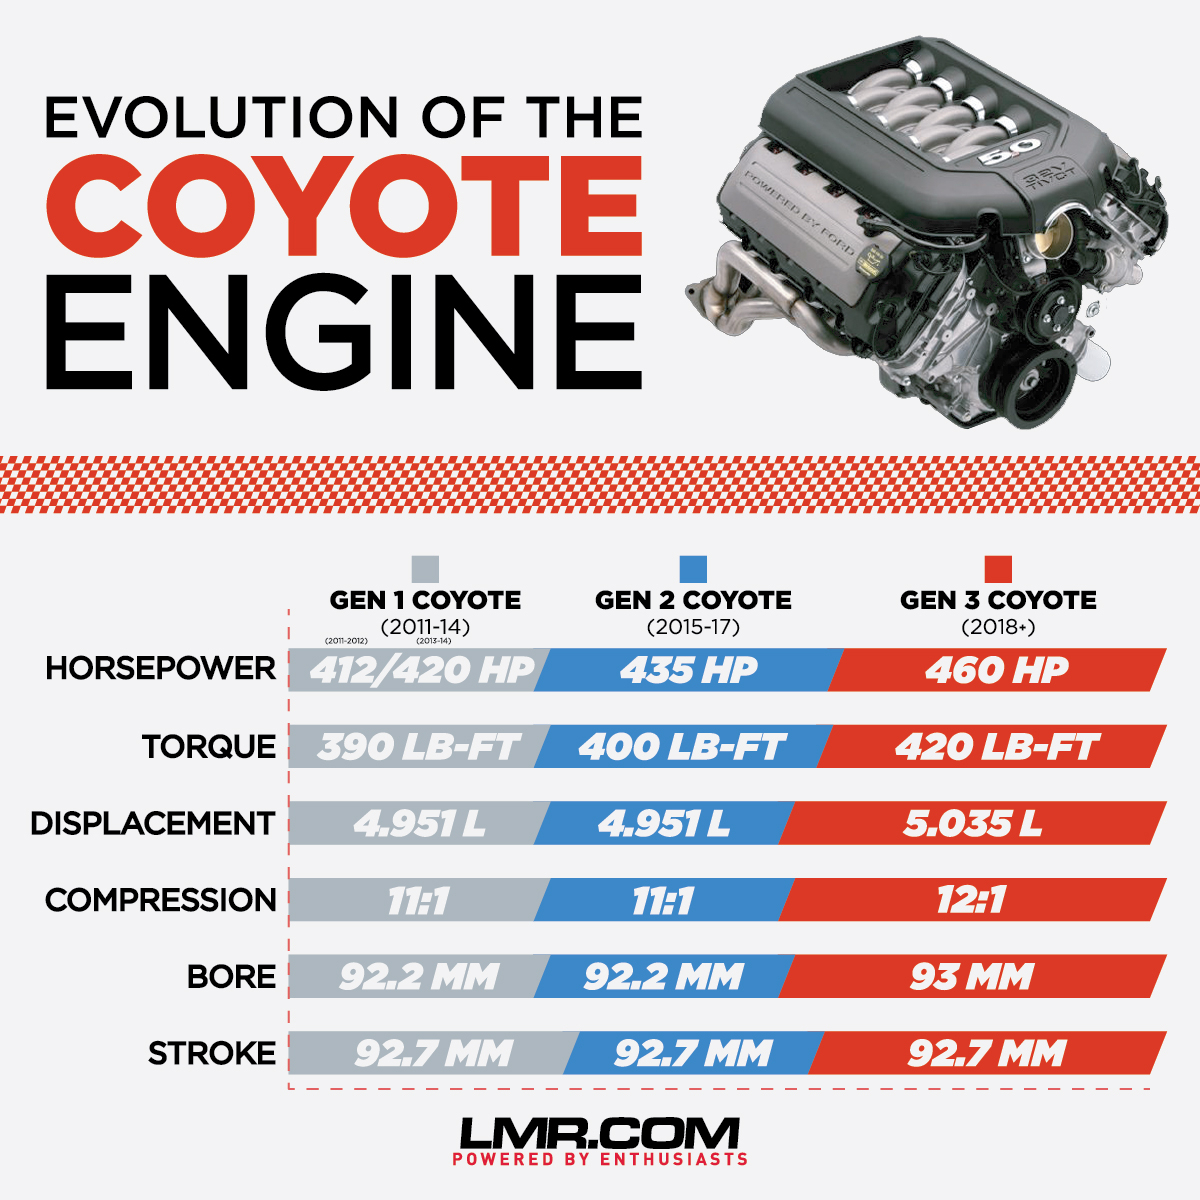 5.0 Coyote Cylinder Numbers